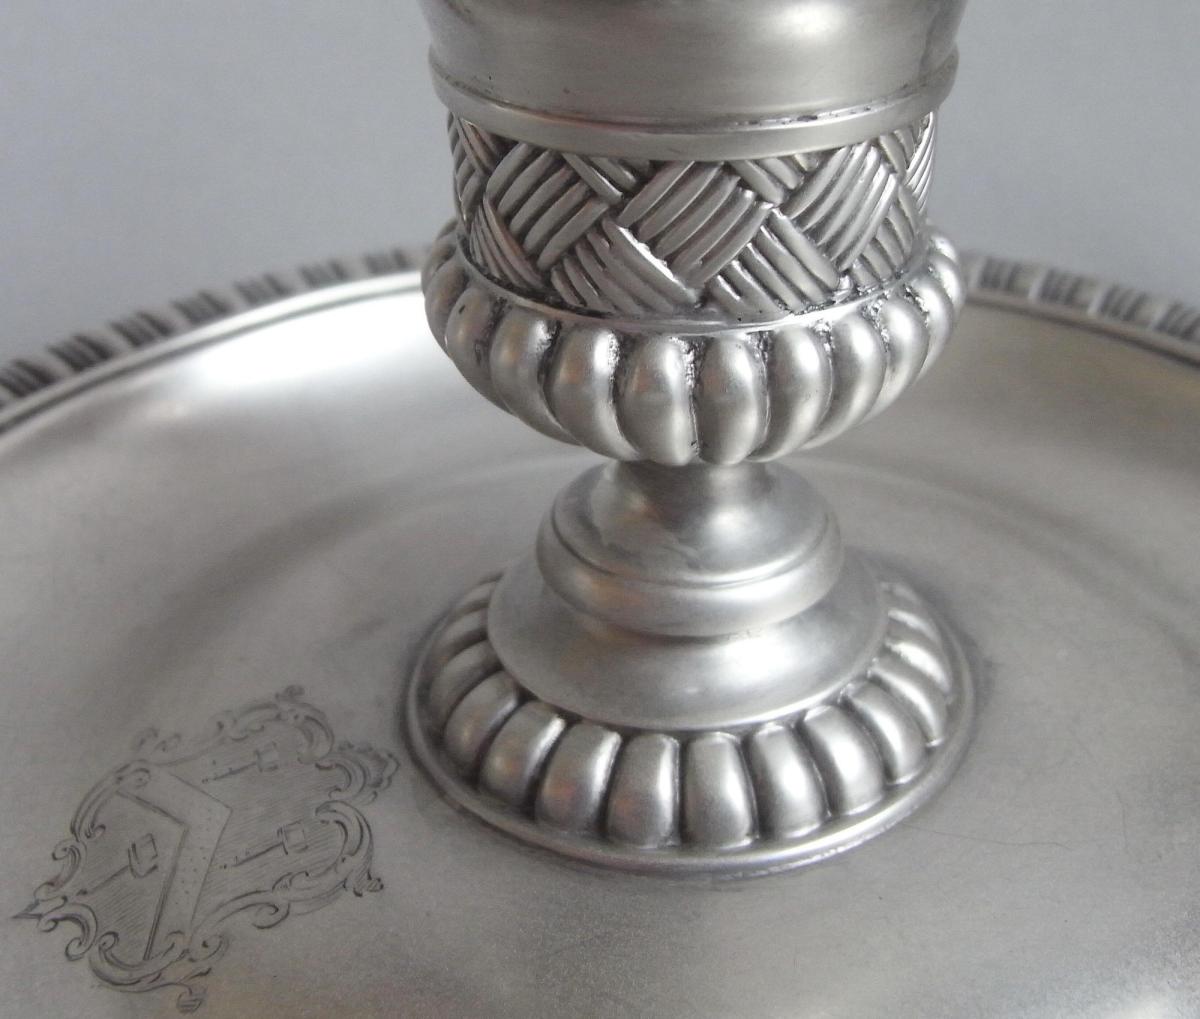 An extremely rare George III Chamberstick made in London in 1815 by Paul Storr